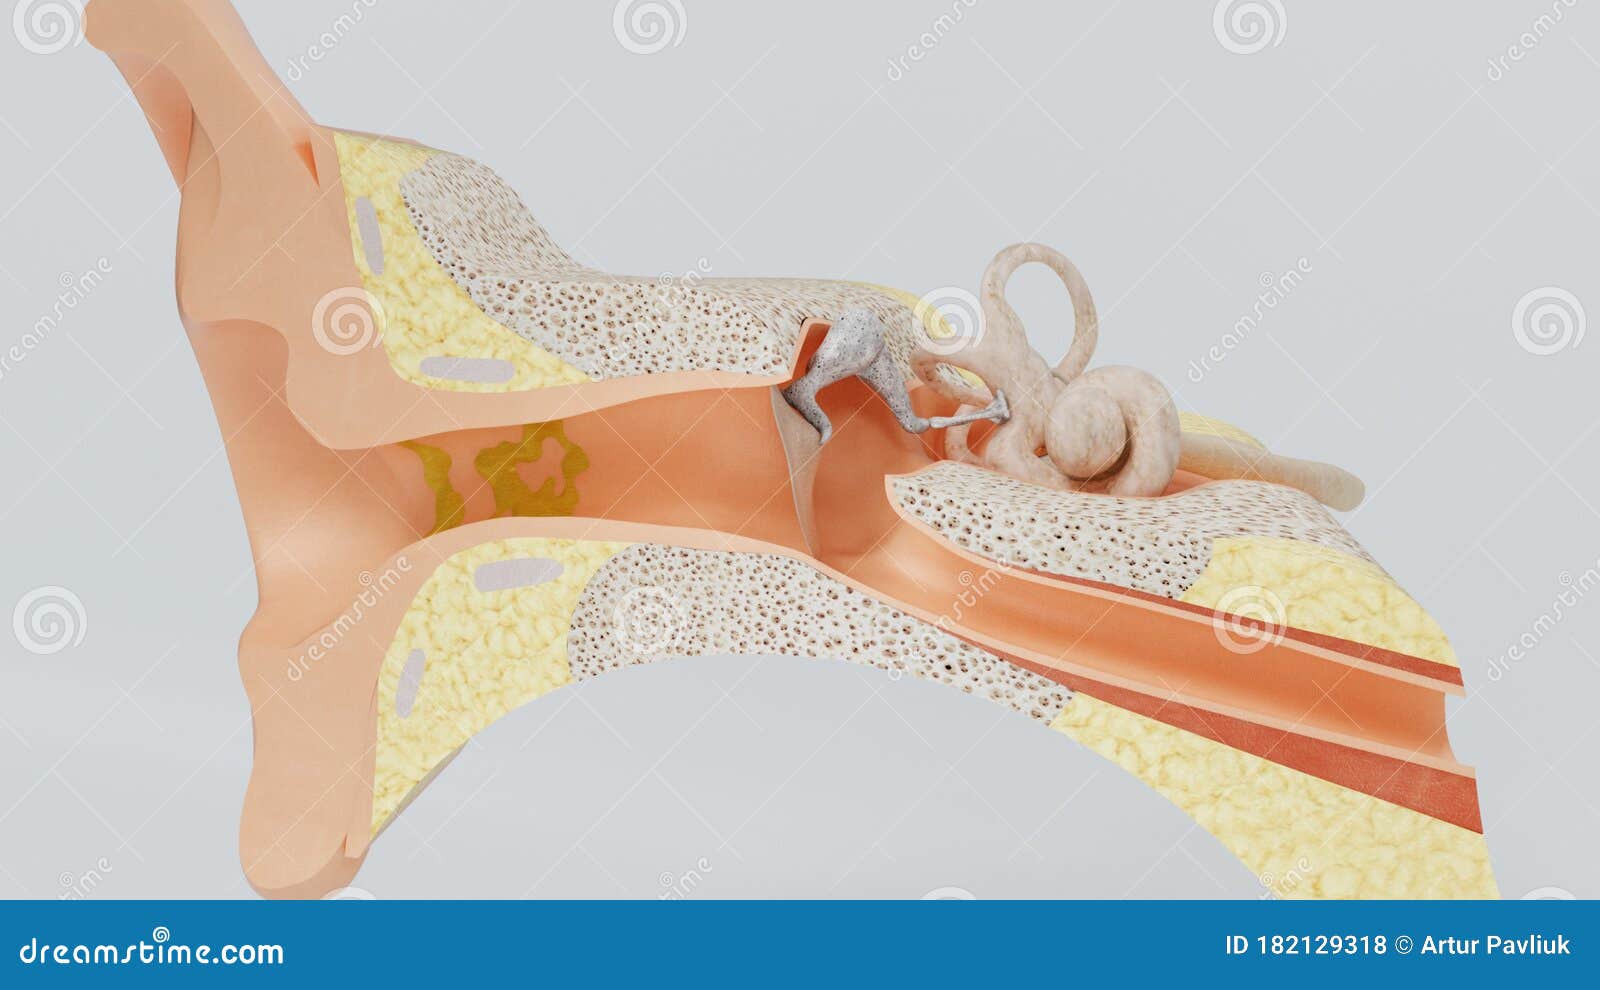 3d Render Structures Of The Human Ear 3d Illustration Stock